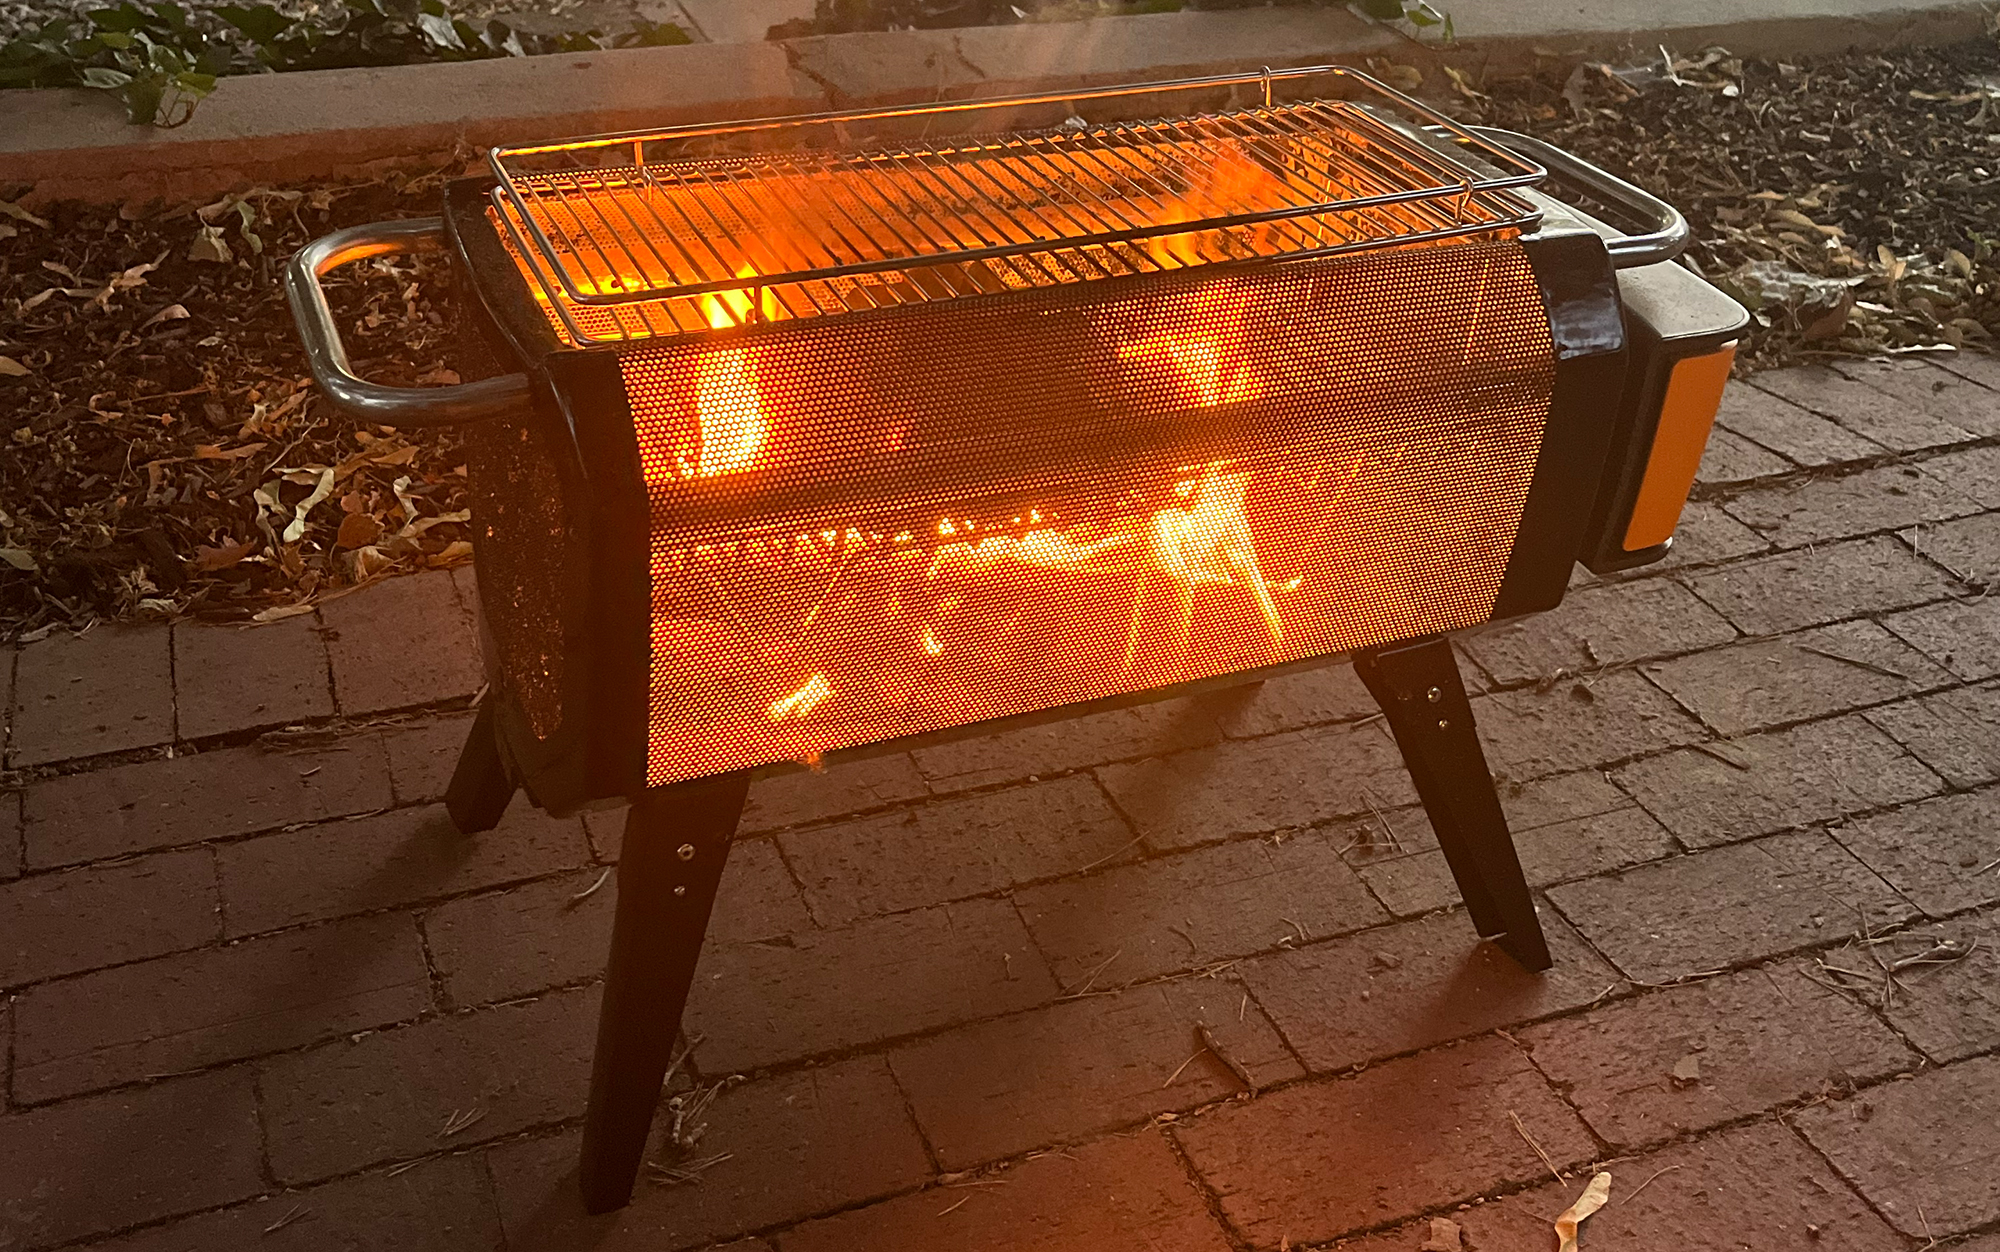 Everyone can enjoy the flames thanks to theFirePit+'s X-ray mesh.